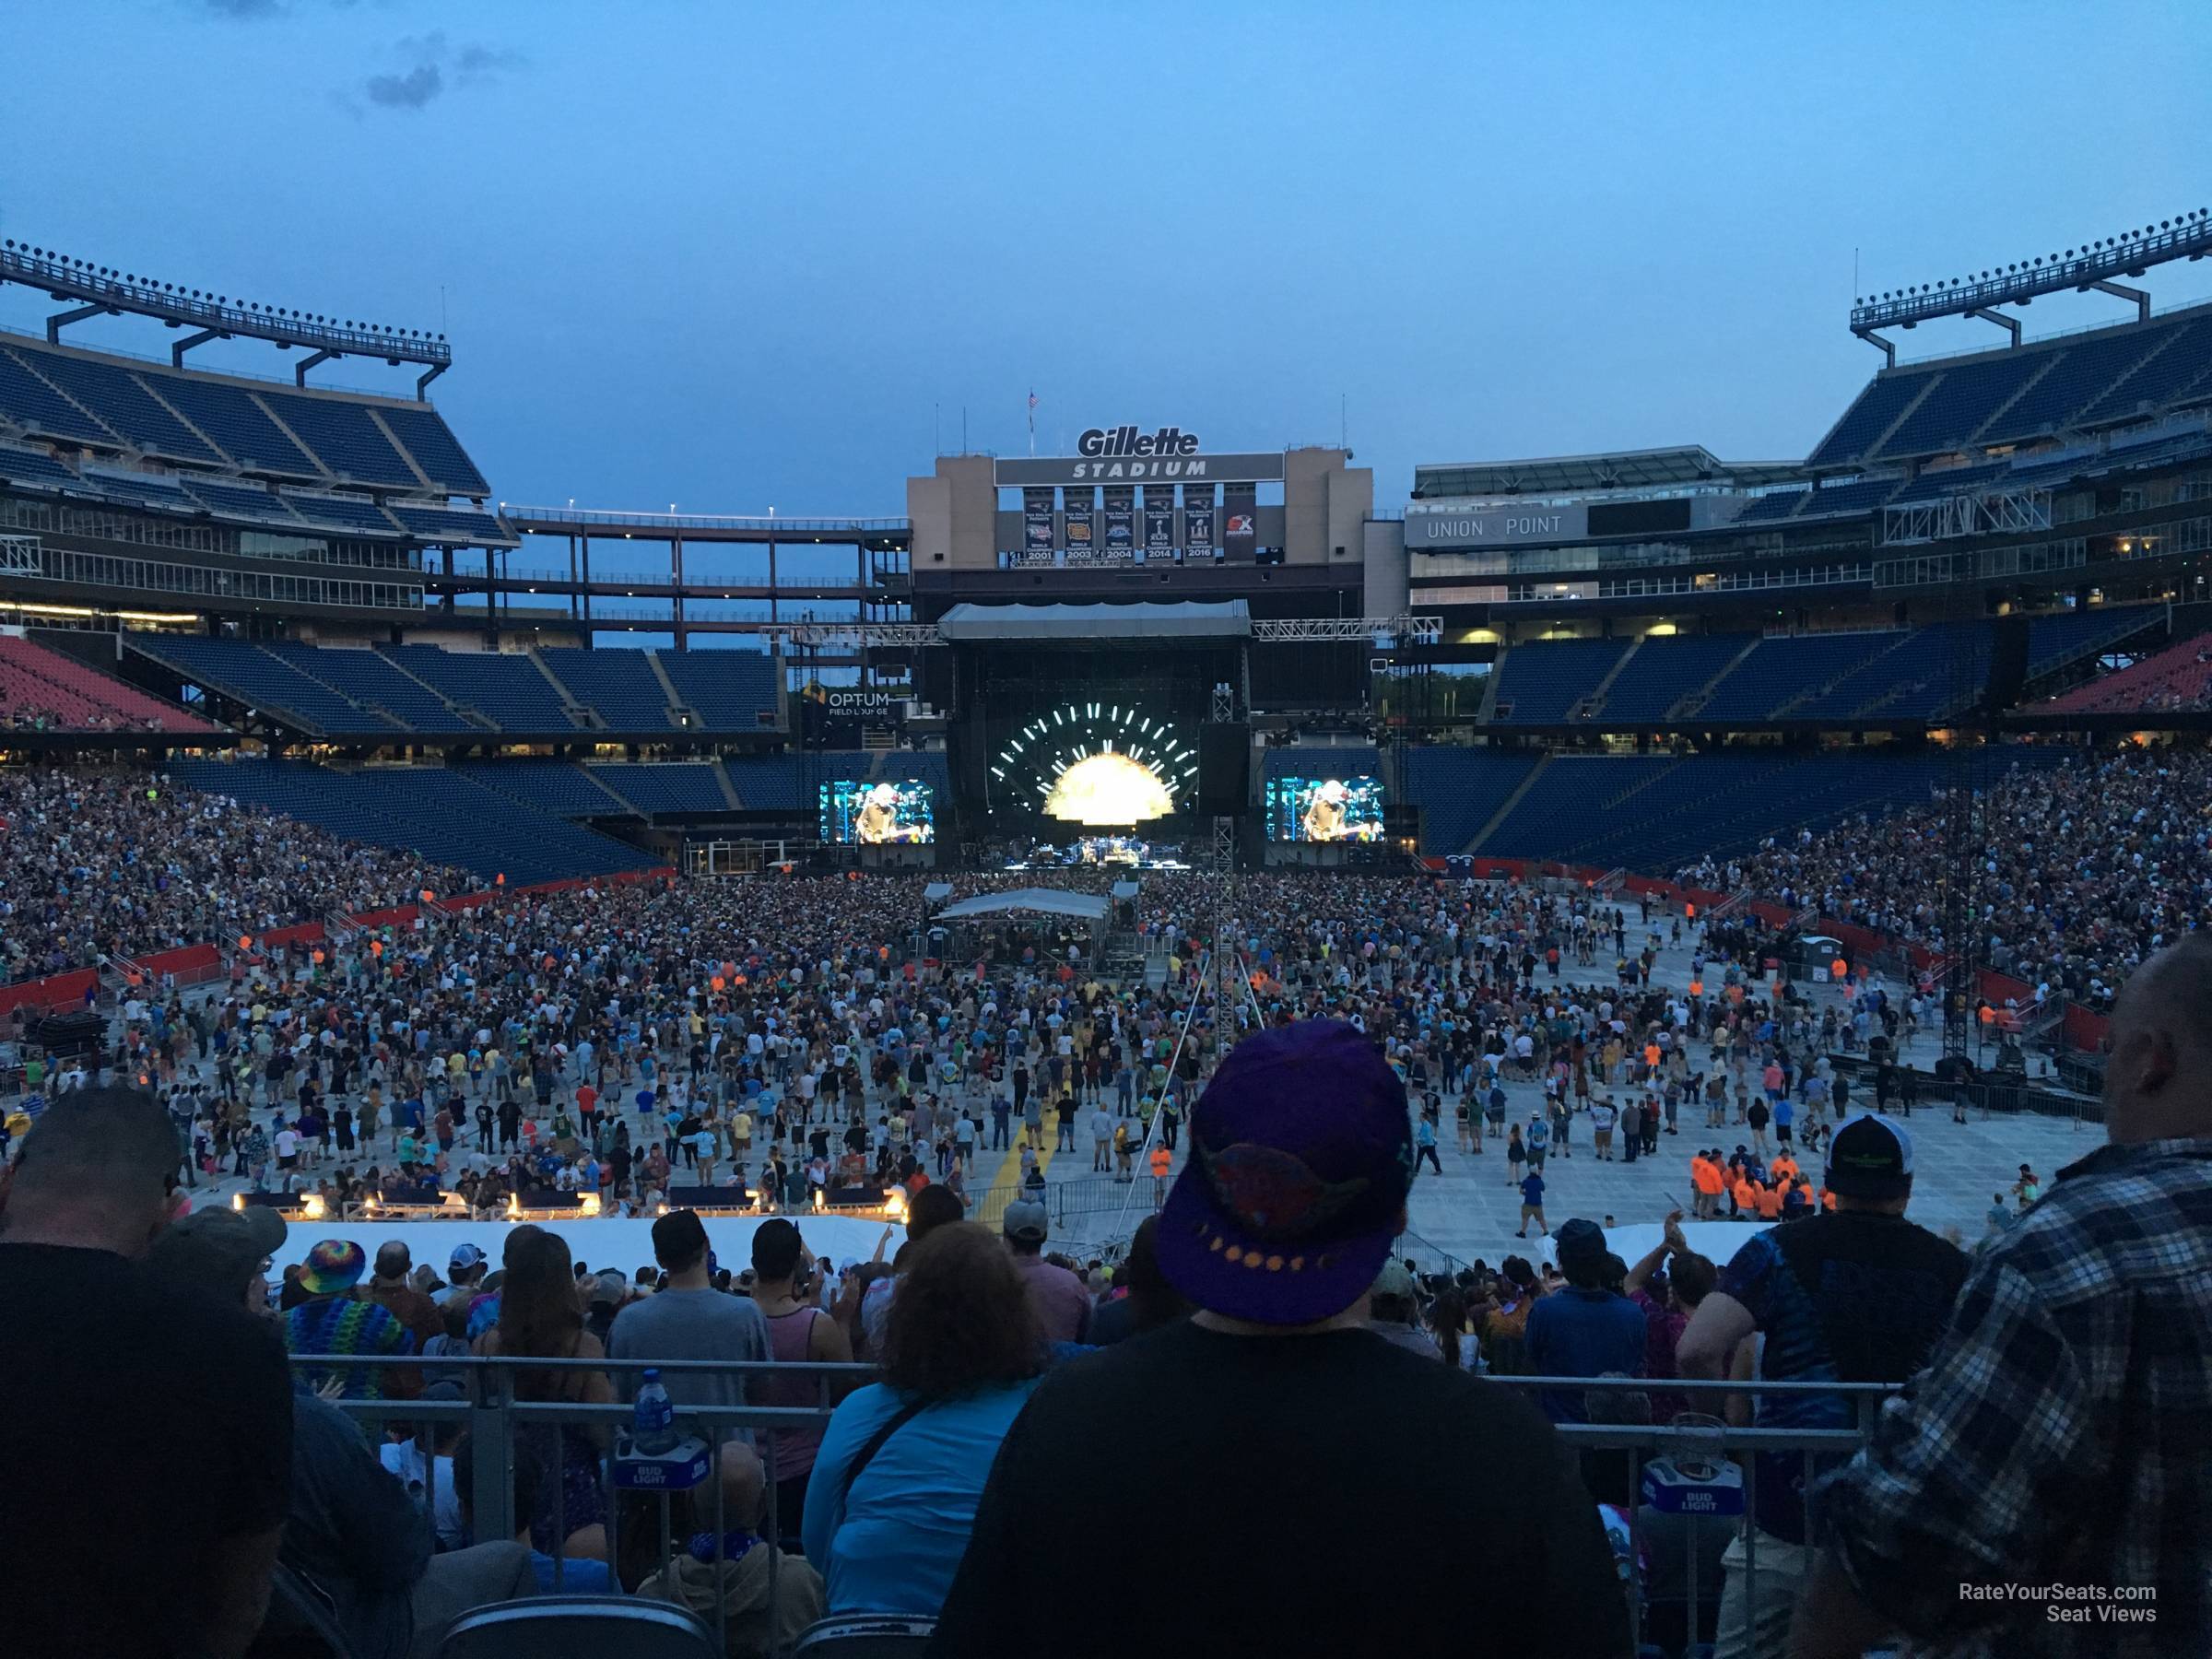 section 142, row 38 seat view  for concert - gillette stadium